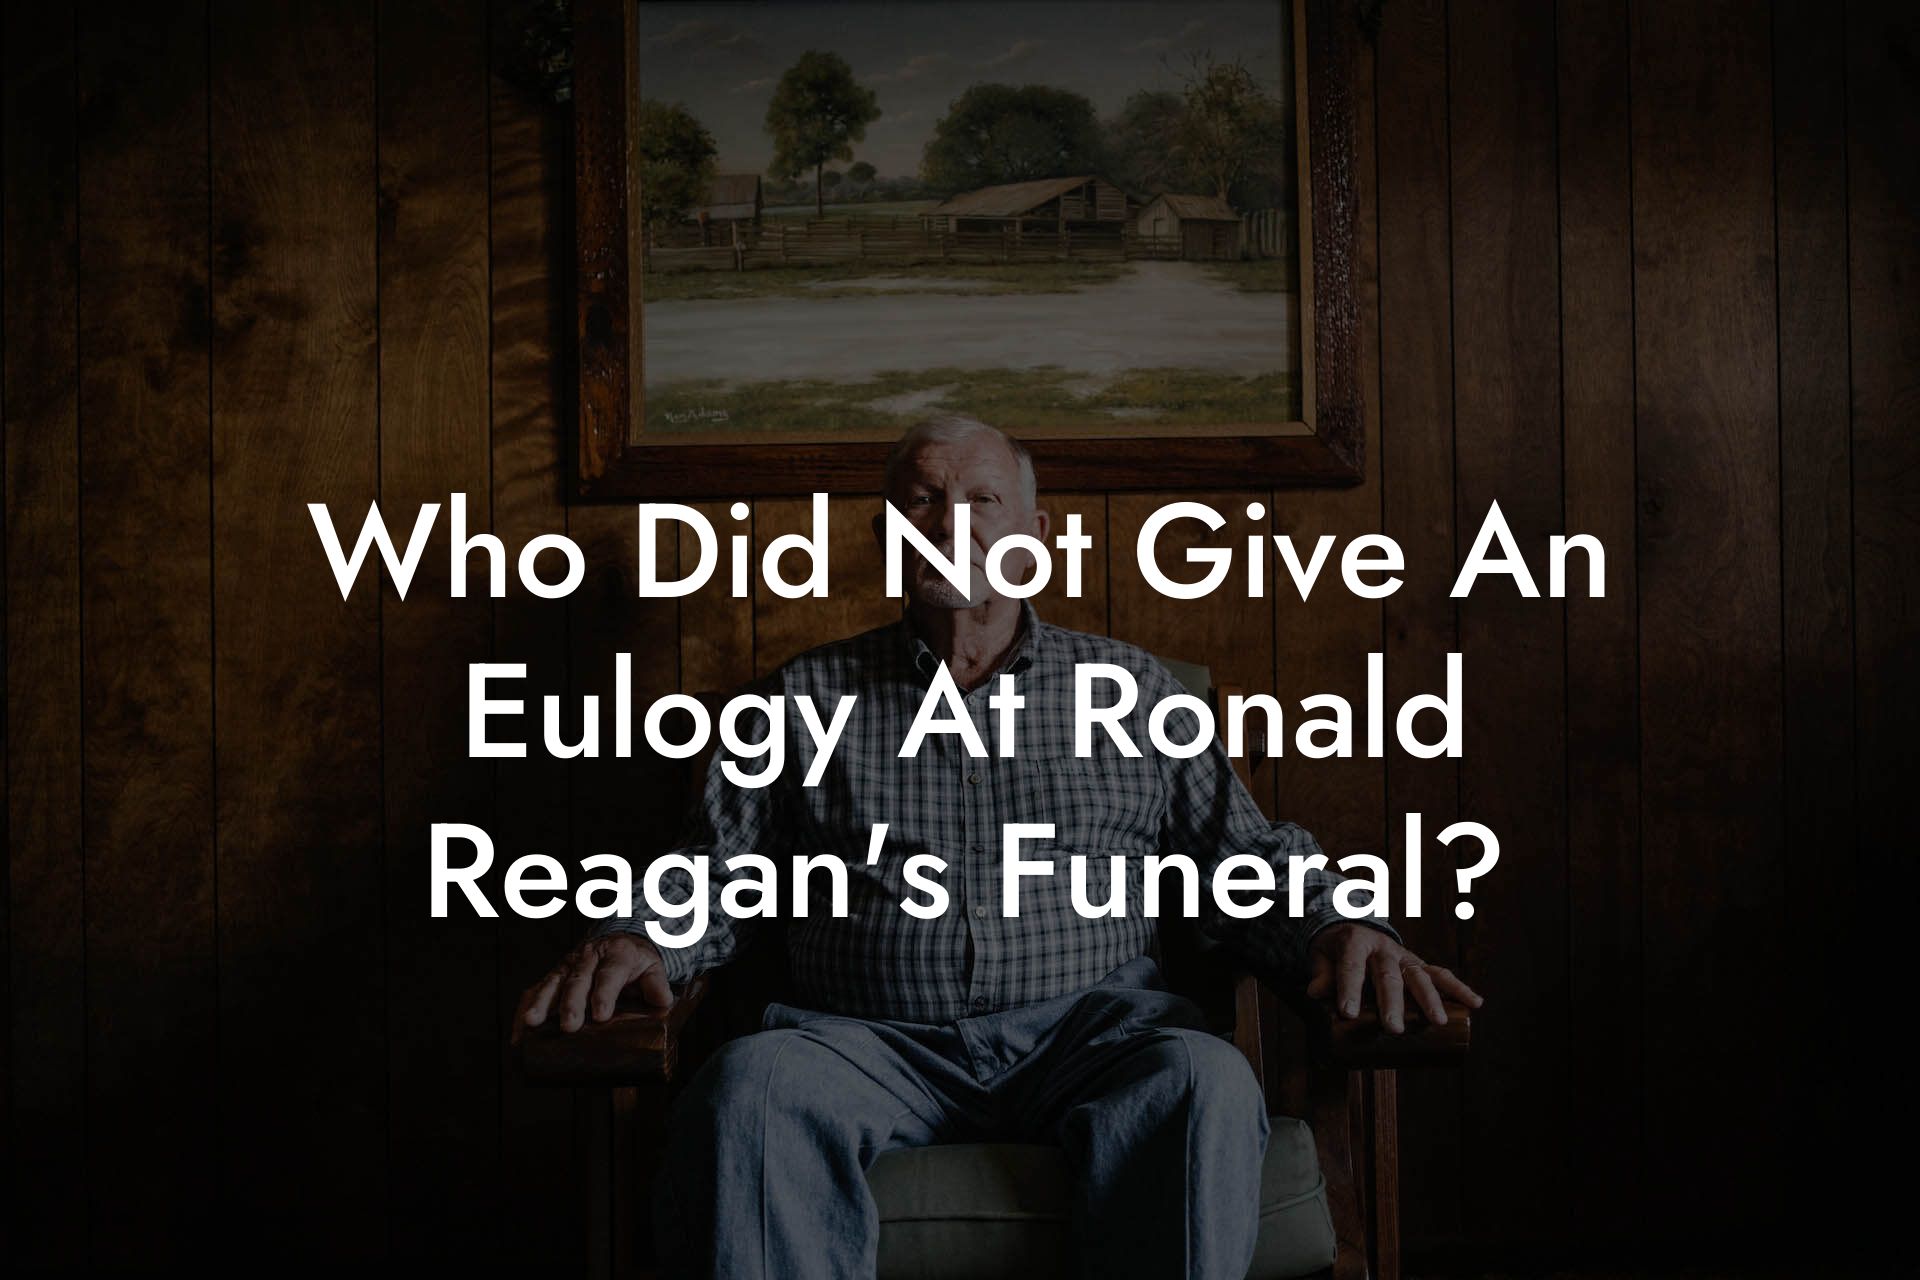 Who Did Not Give An Eulogy At Ronald Reagan's Funeral